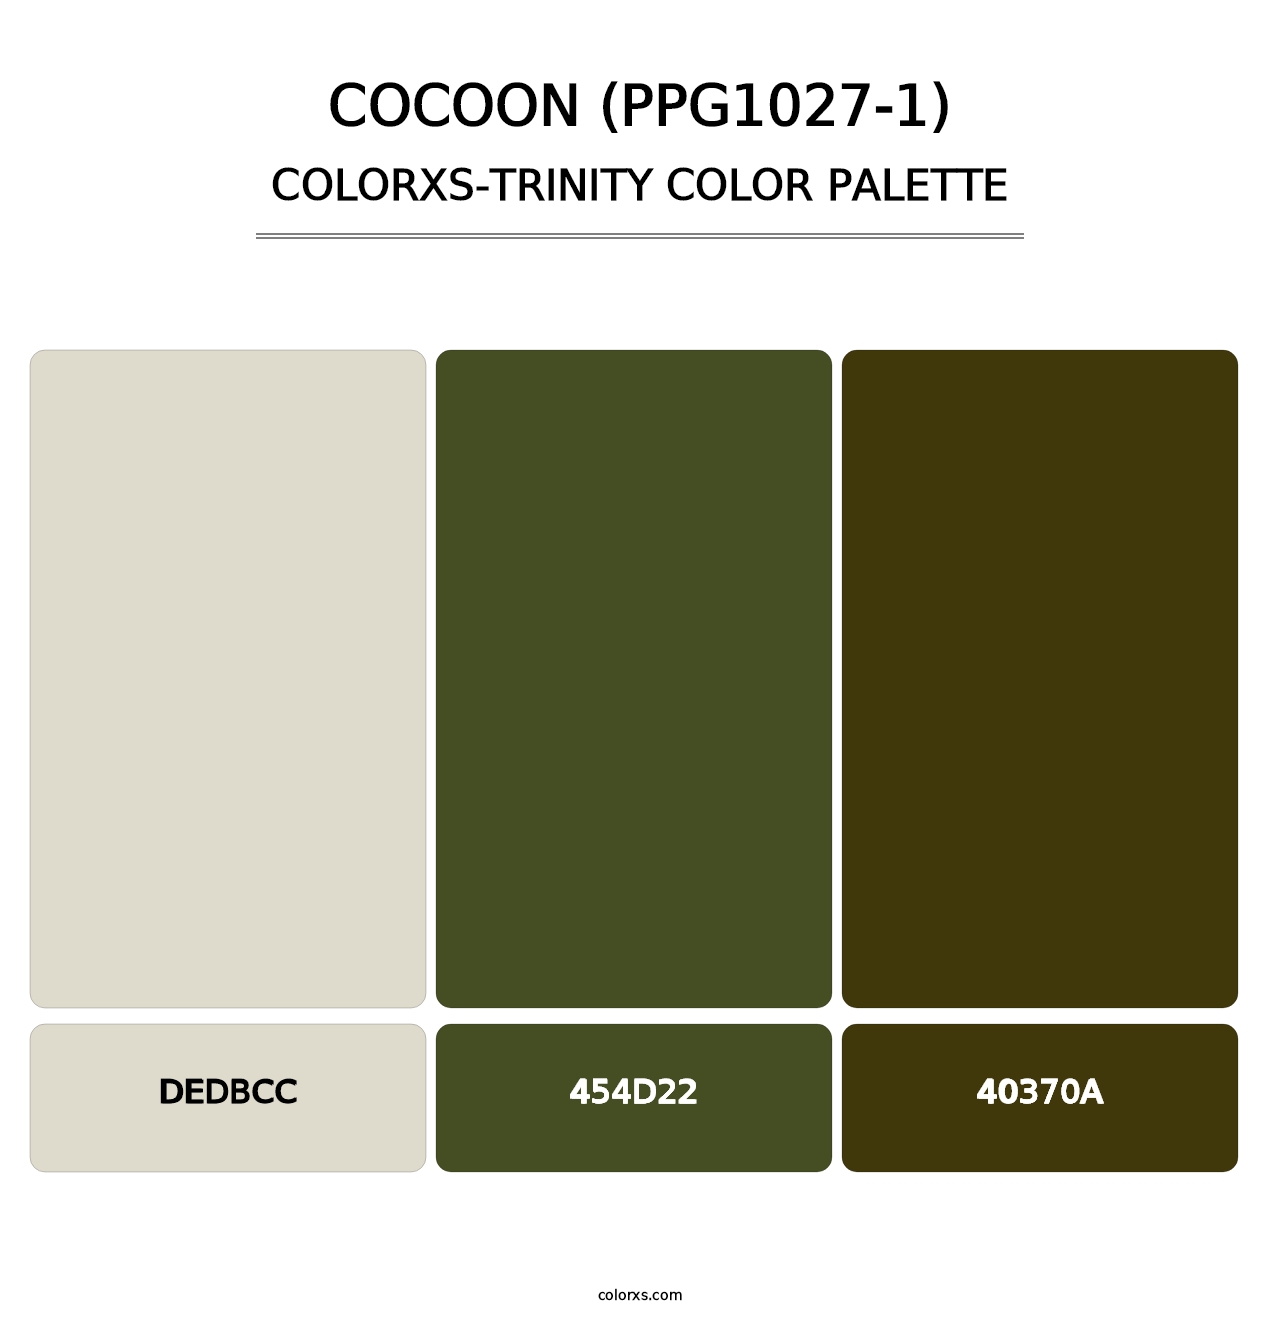 Cocoon (PPG1027-1) - Colorxs Trinity Palette